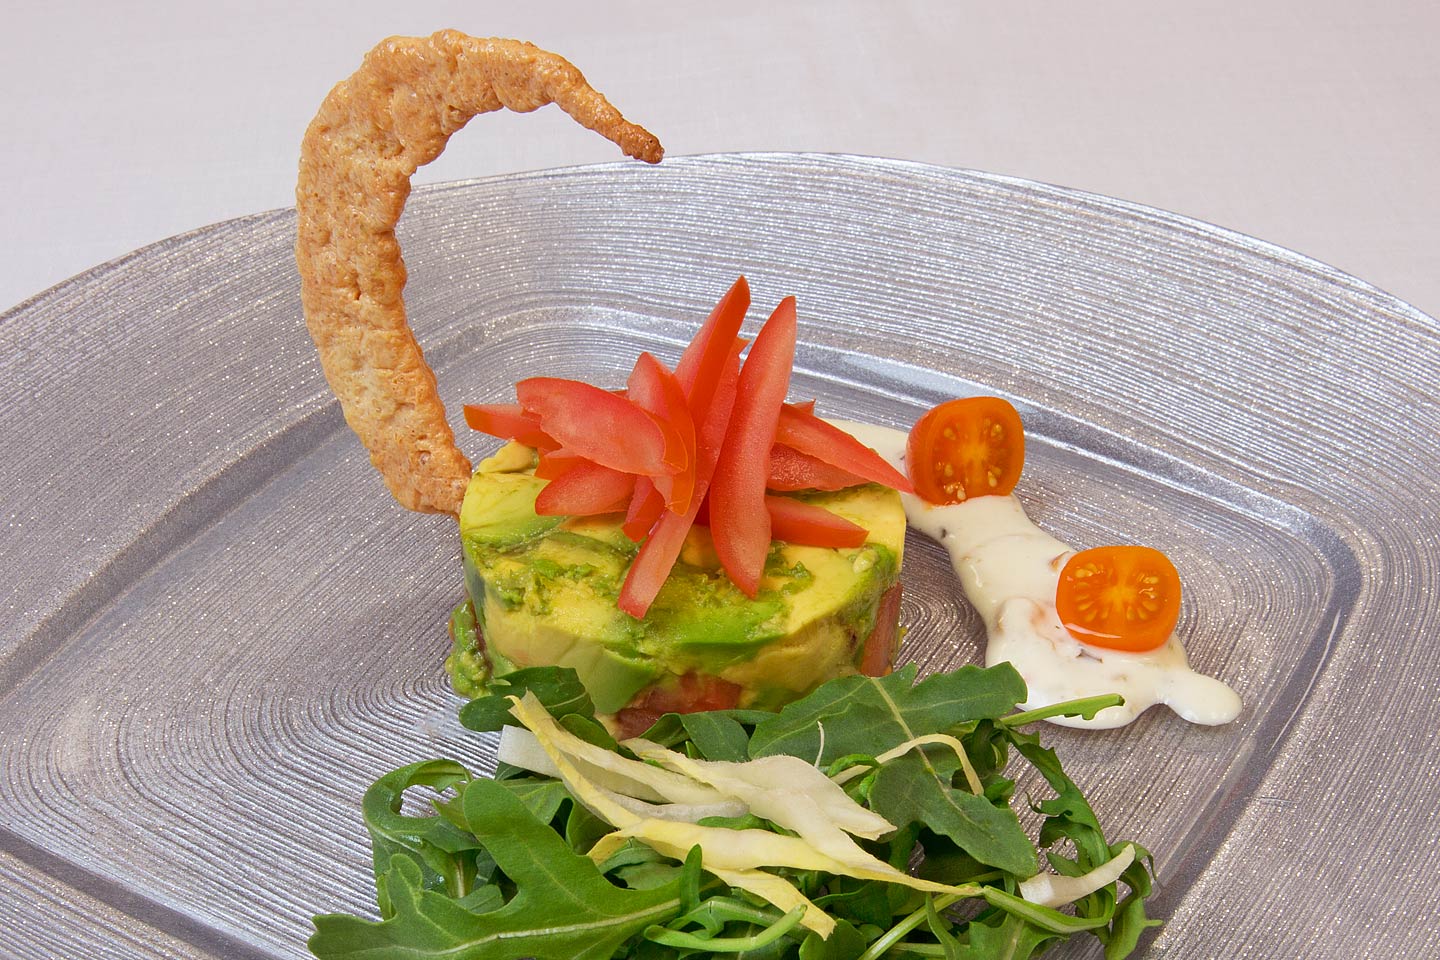 delicious gourmet kosher salad featuring a crispy crescent moon cracker prepared by danziger kosher catering and served on a circle square charger plate